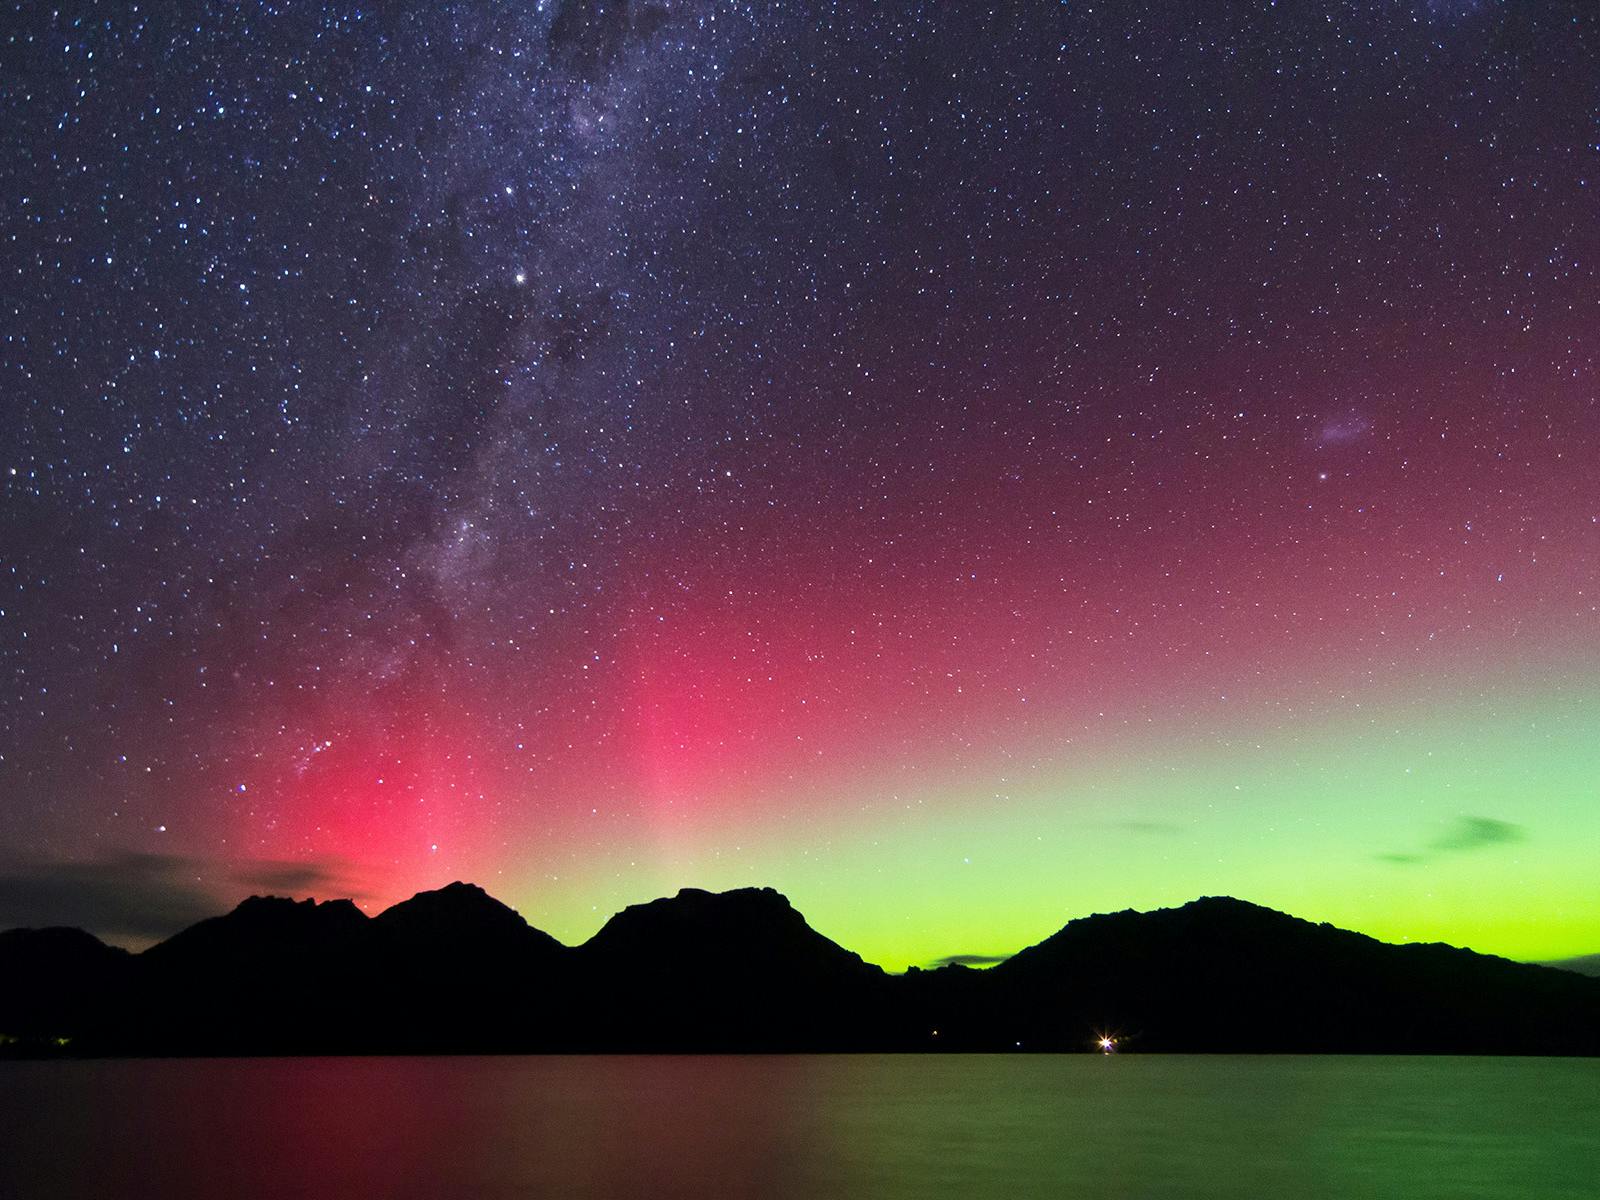 The Aurora Australis, or southern lights, over the Hazards at Freycinet National Park